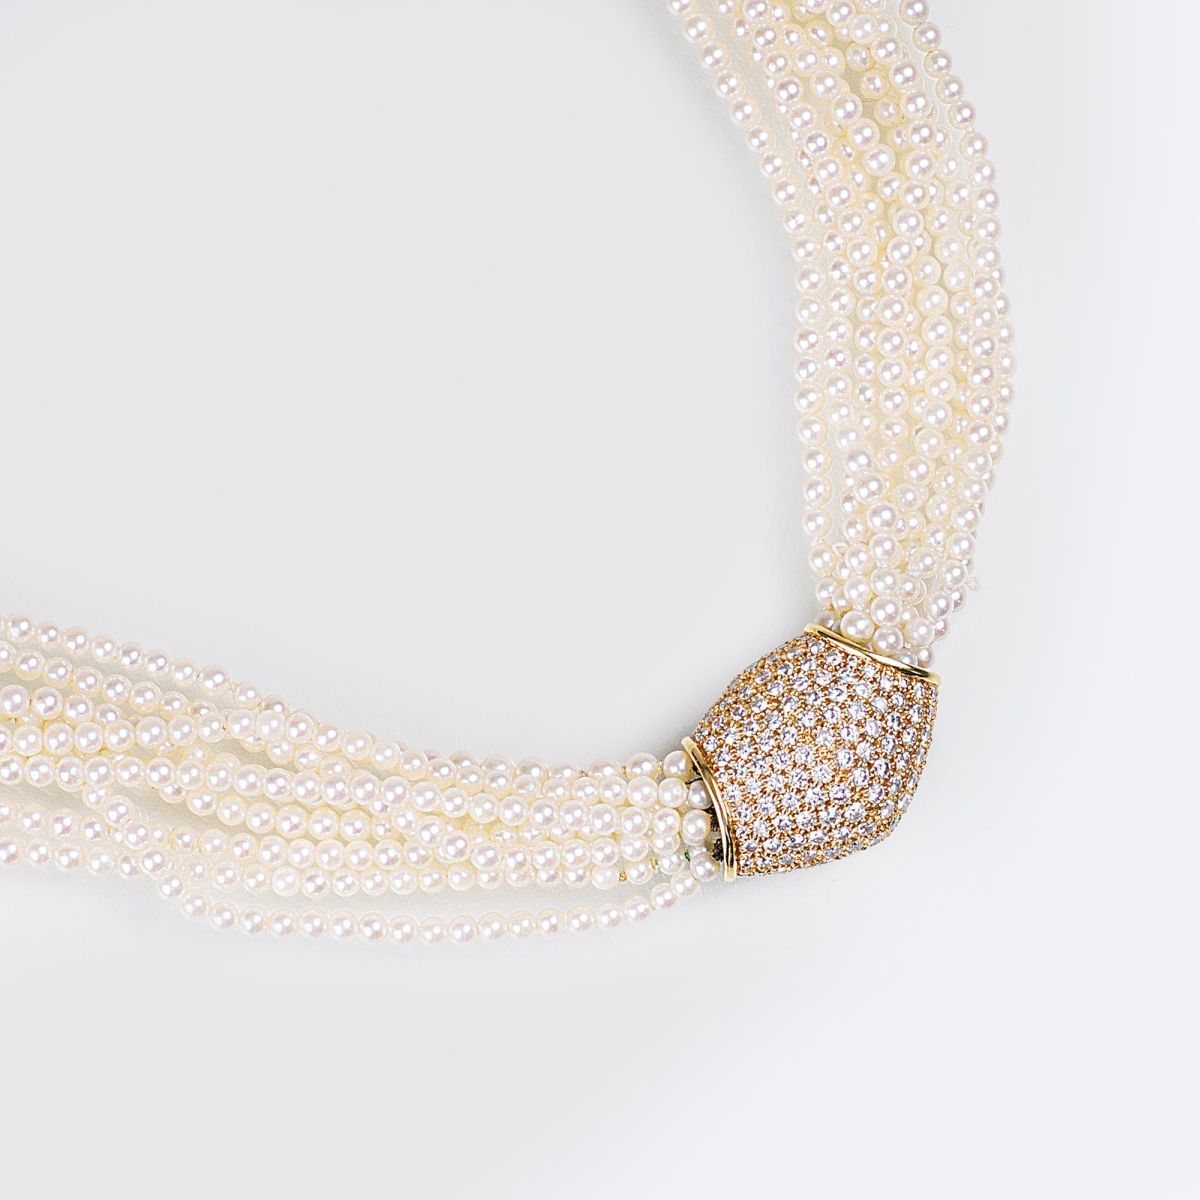 A Pearl Necklace with a precious Diamond Clasp